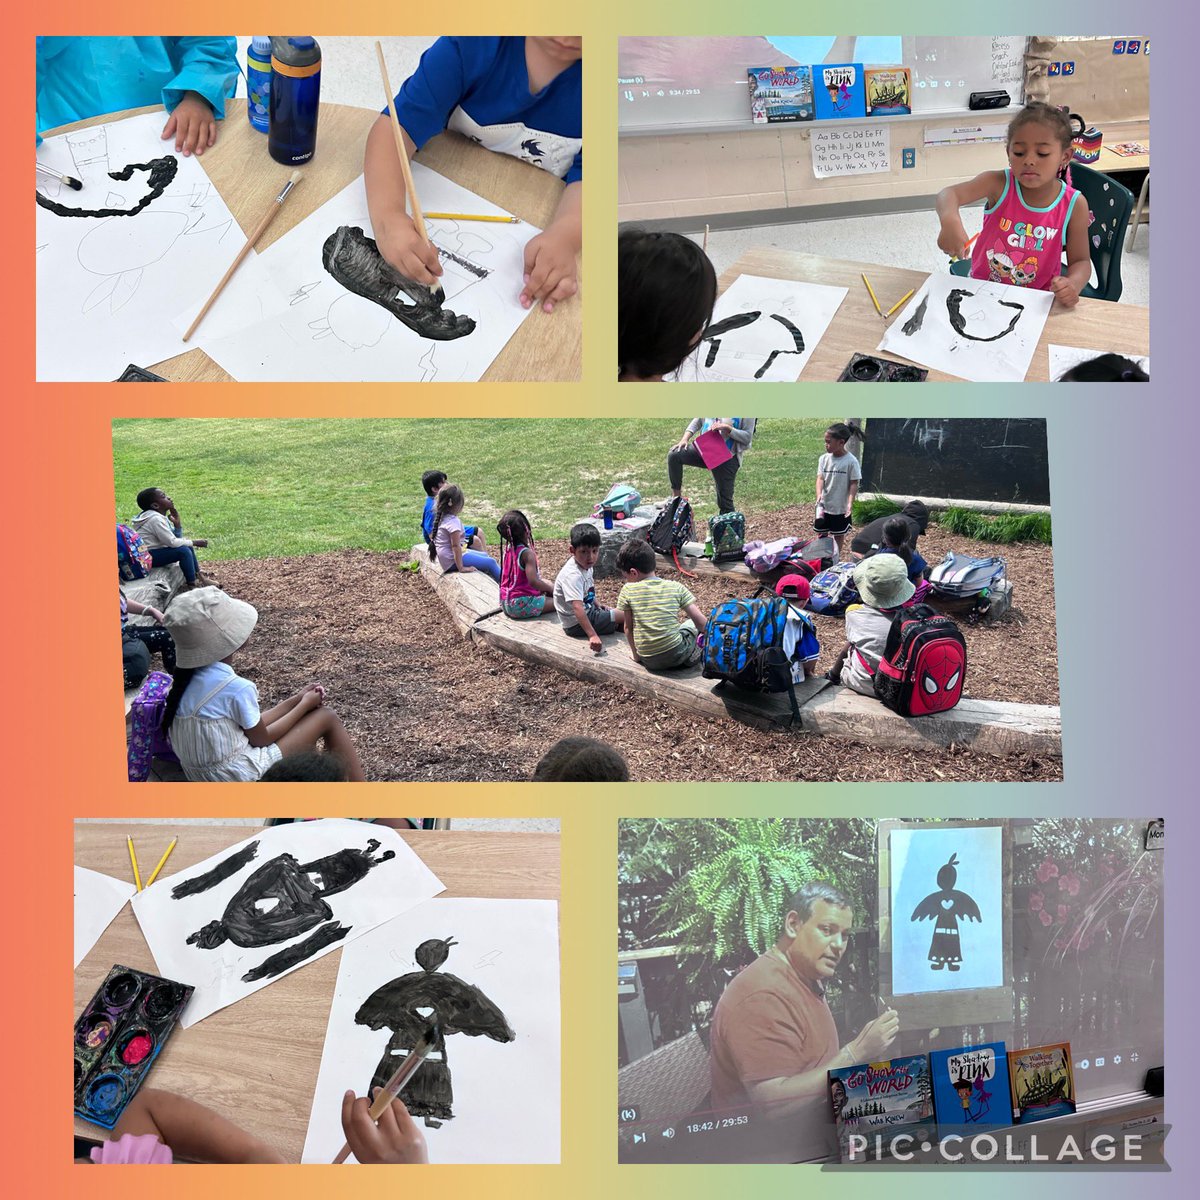 We painted step by step with @IsaacMurdoch1 today. Thank you @jodiesgot5 and team for providing these opportunities. We went outside to show gratitude to the land, and practice our sound wall in our natural surroundings! @PVanier_DPCDSB @DPCDSBSchools